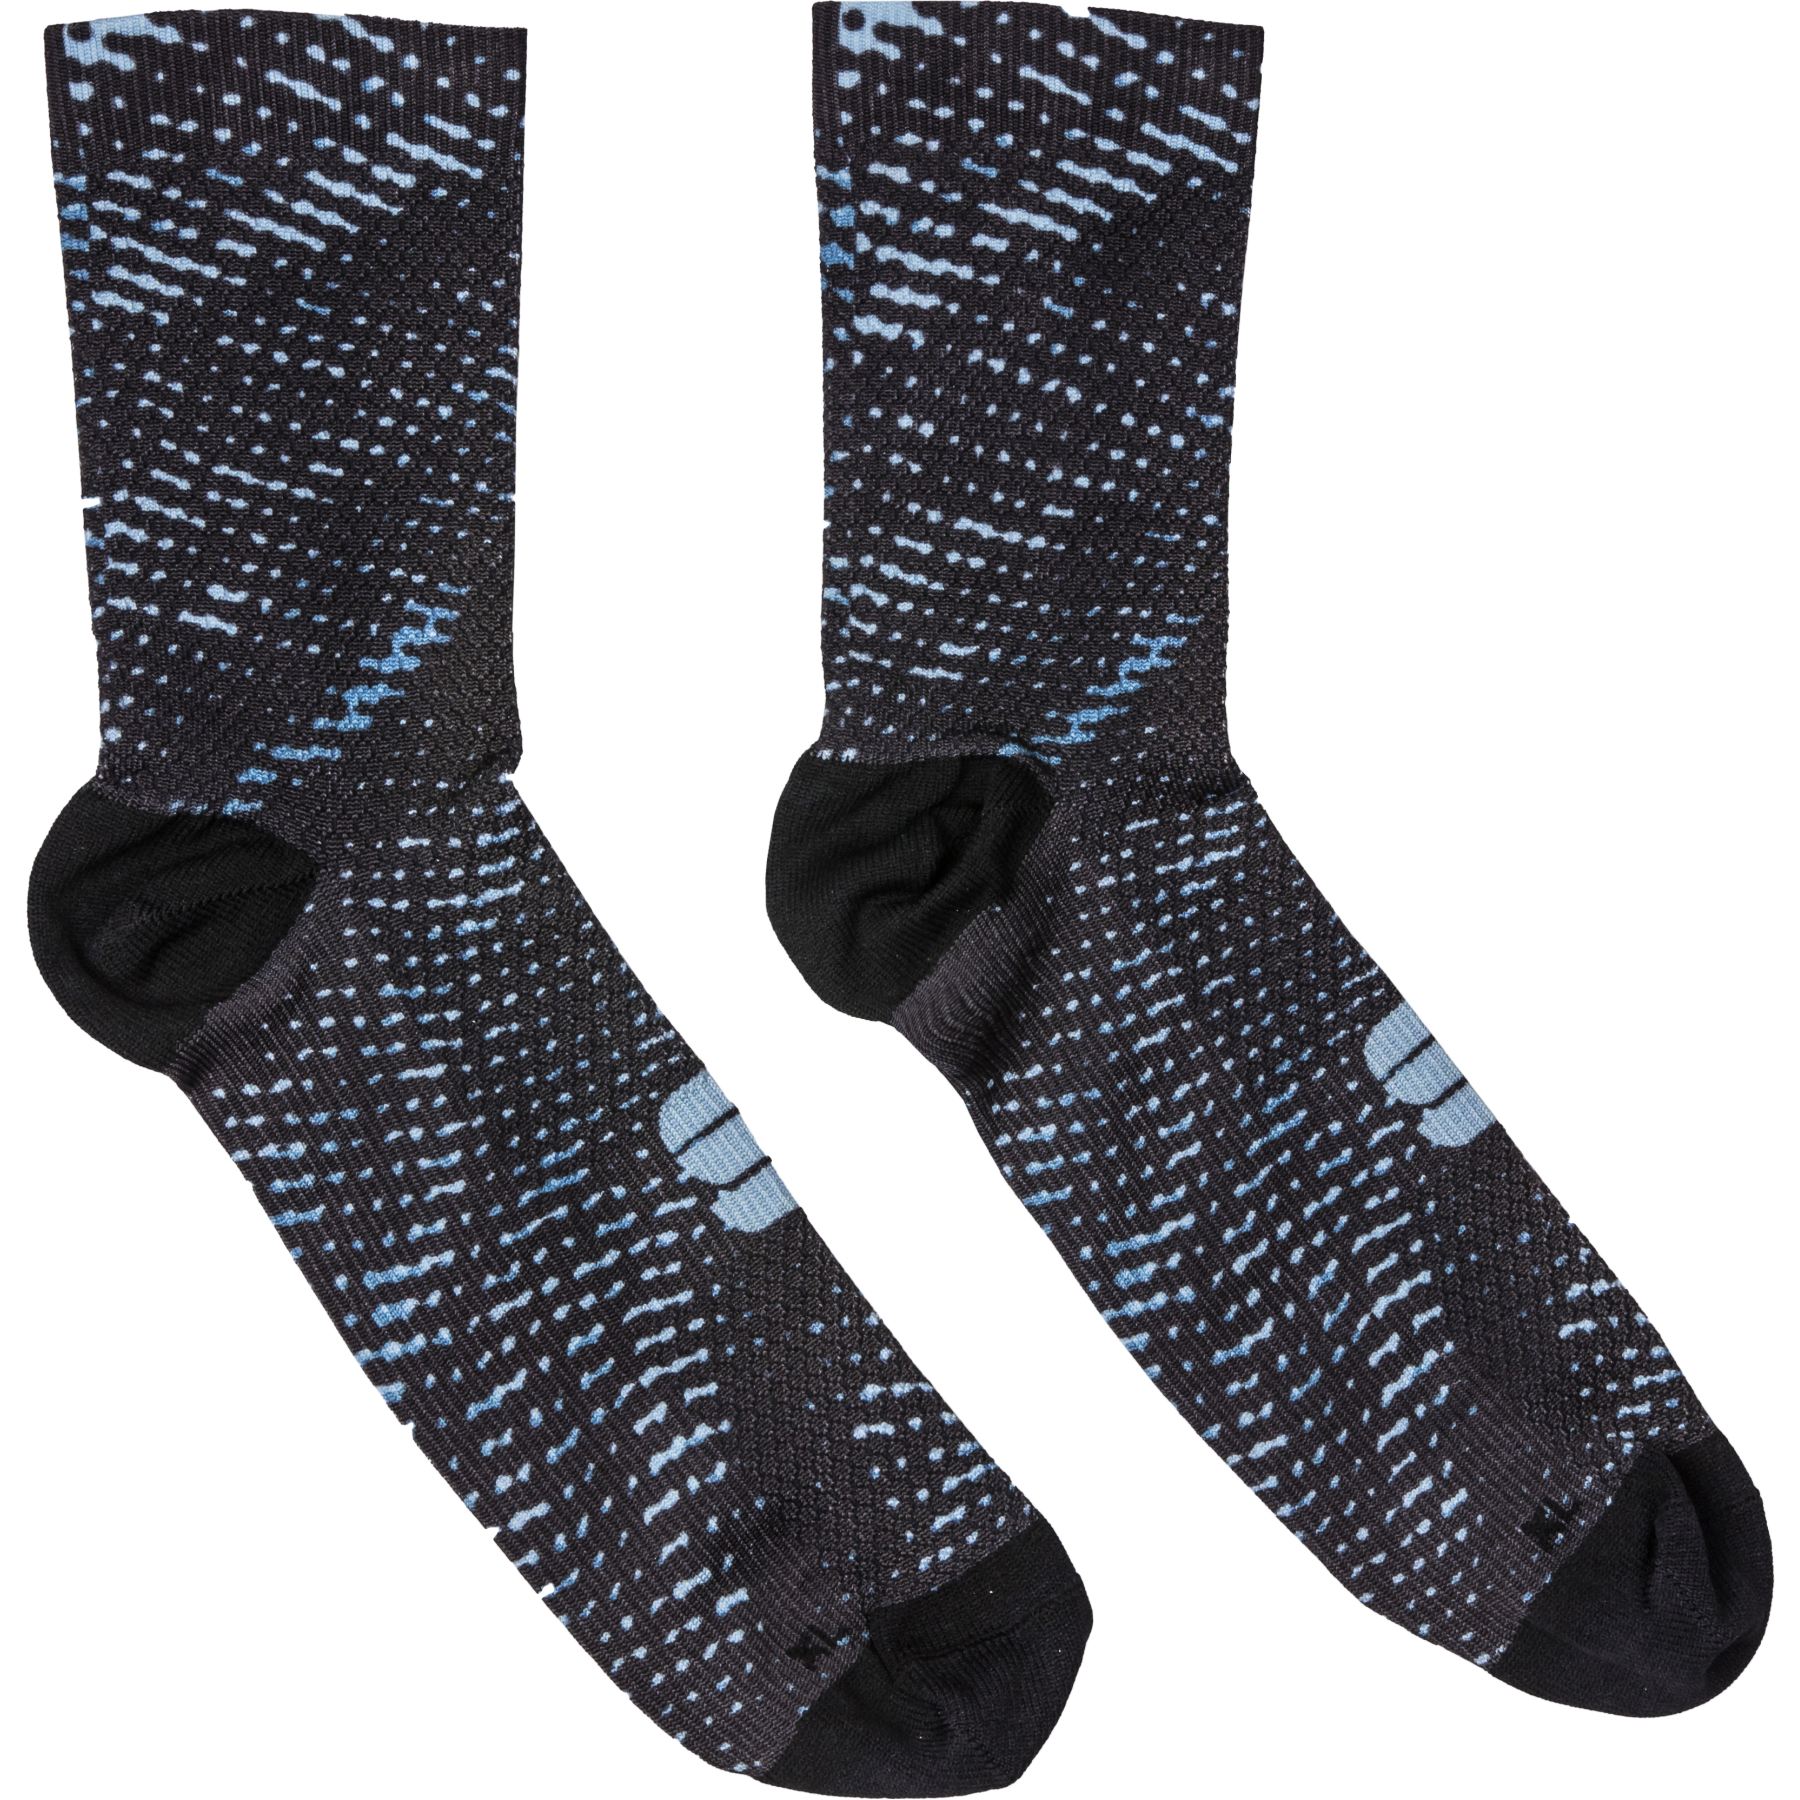 Picture of Sportful Cliff Cycling Socks - 002 Black